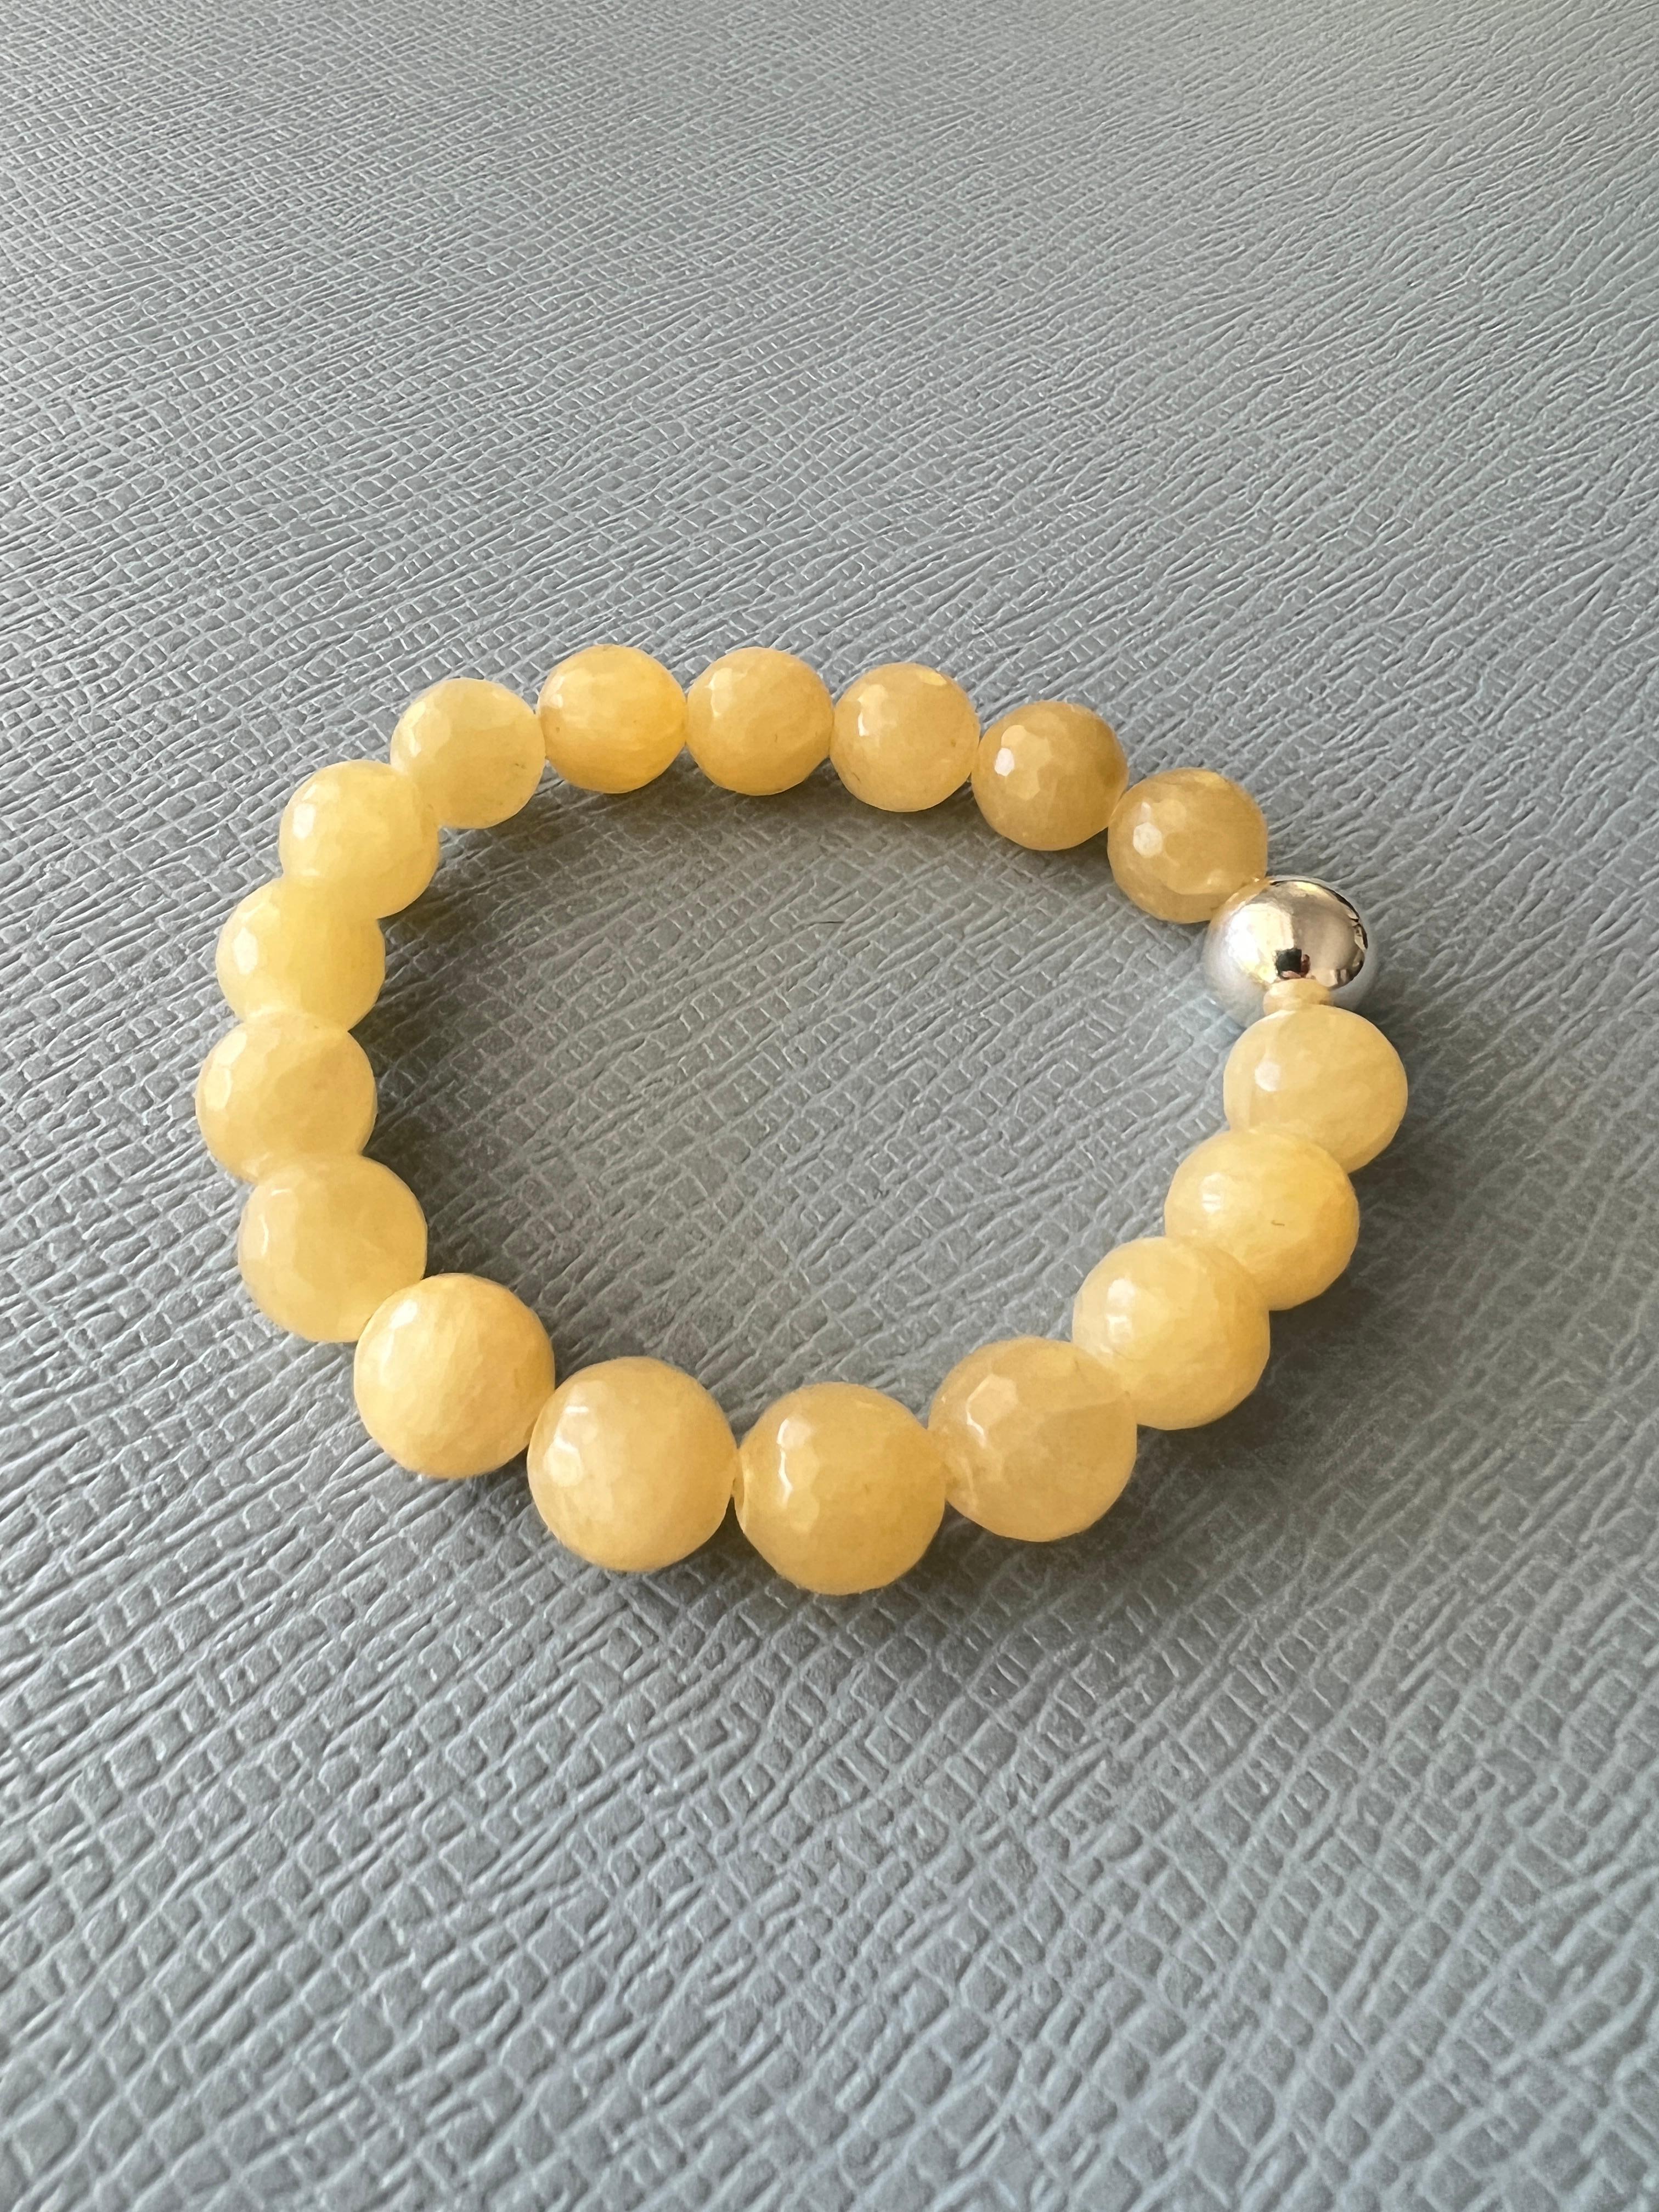 Yellow Calcite Round Facteted Bead Bracelet Silver J Dauphin For Sale 4